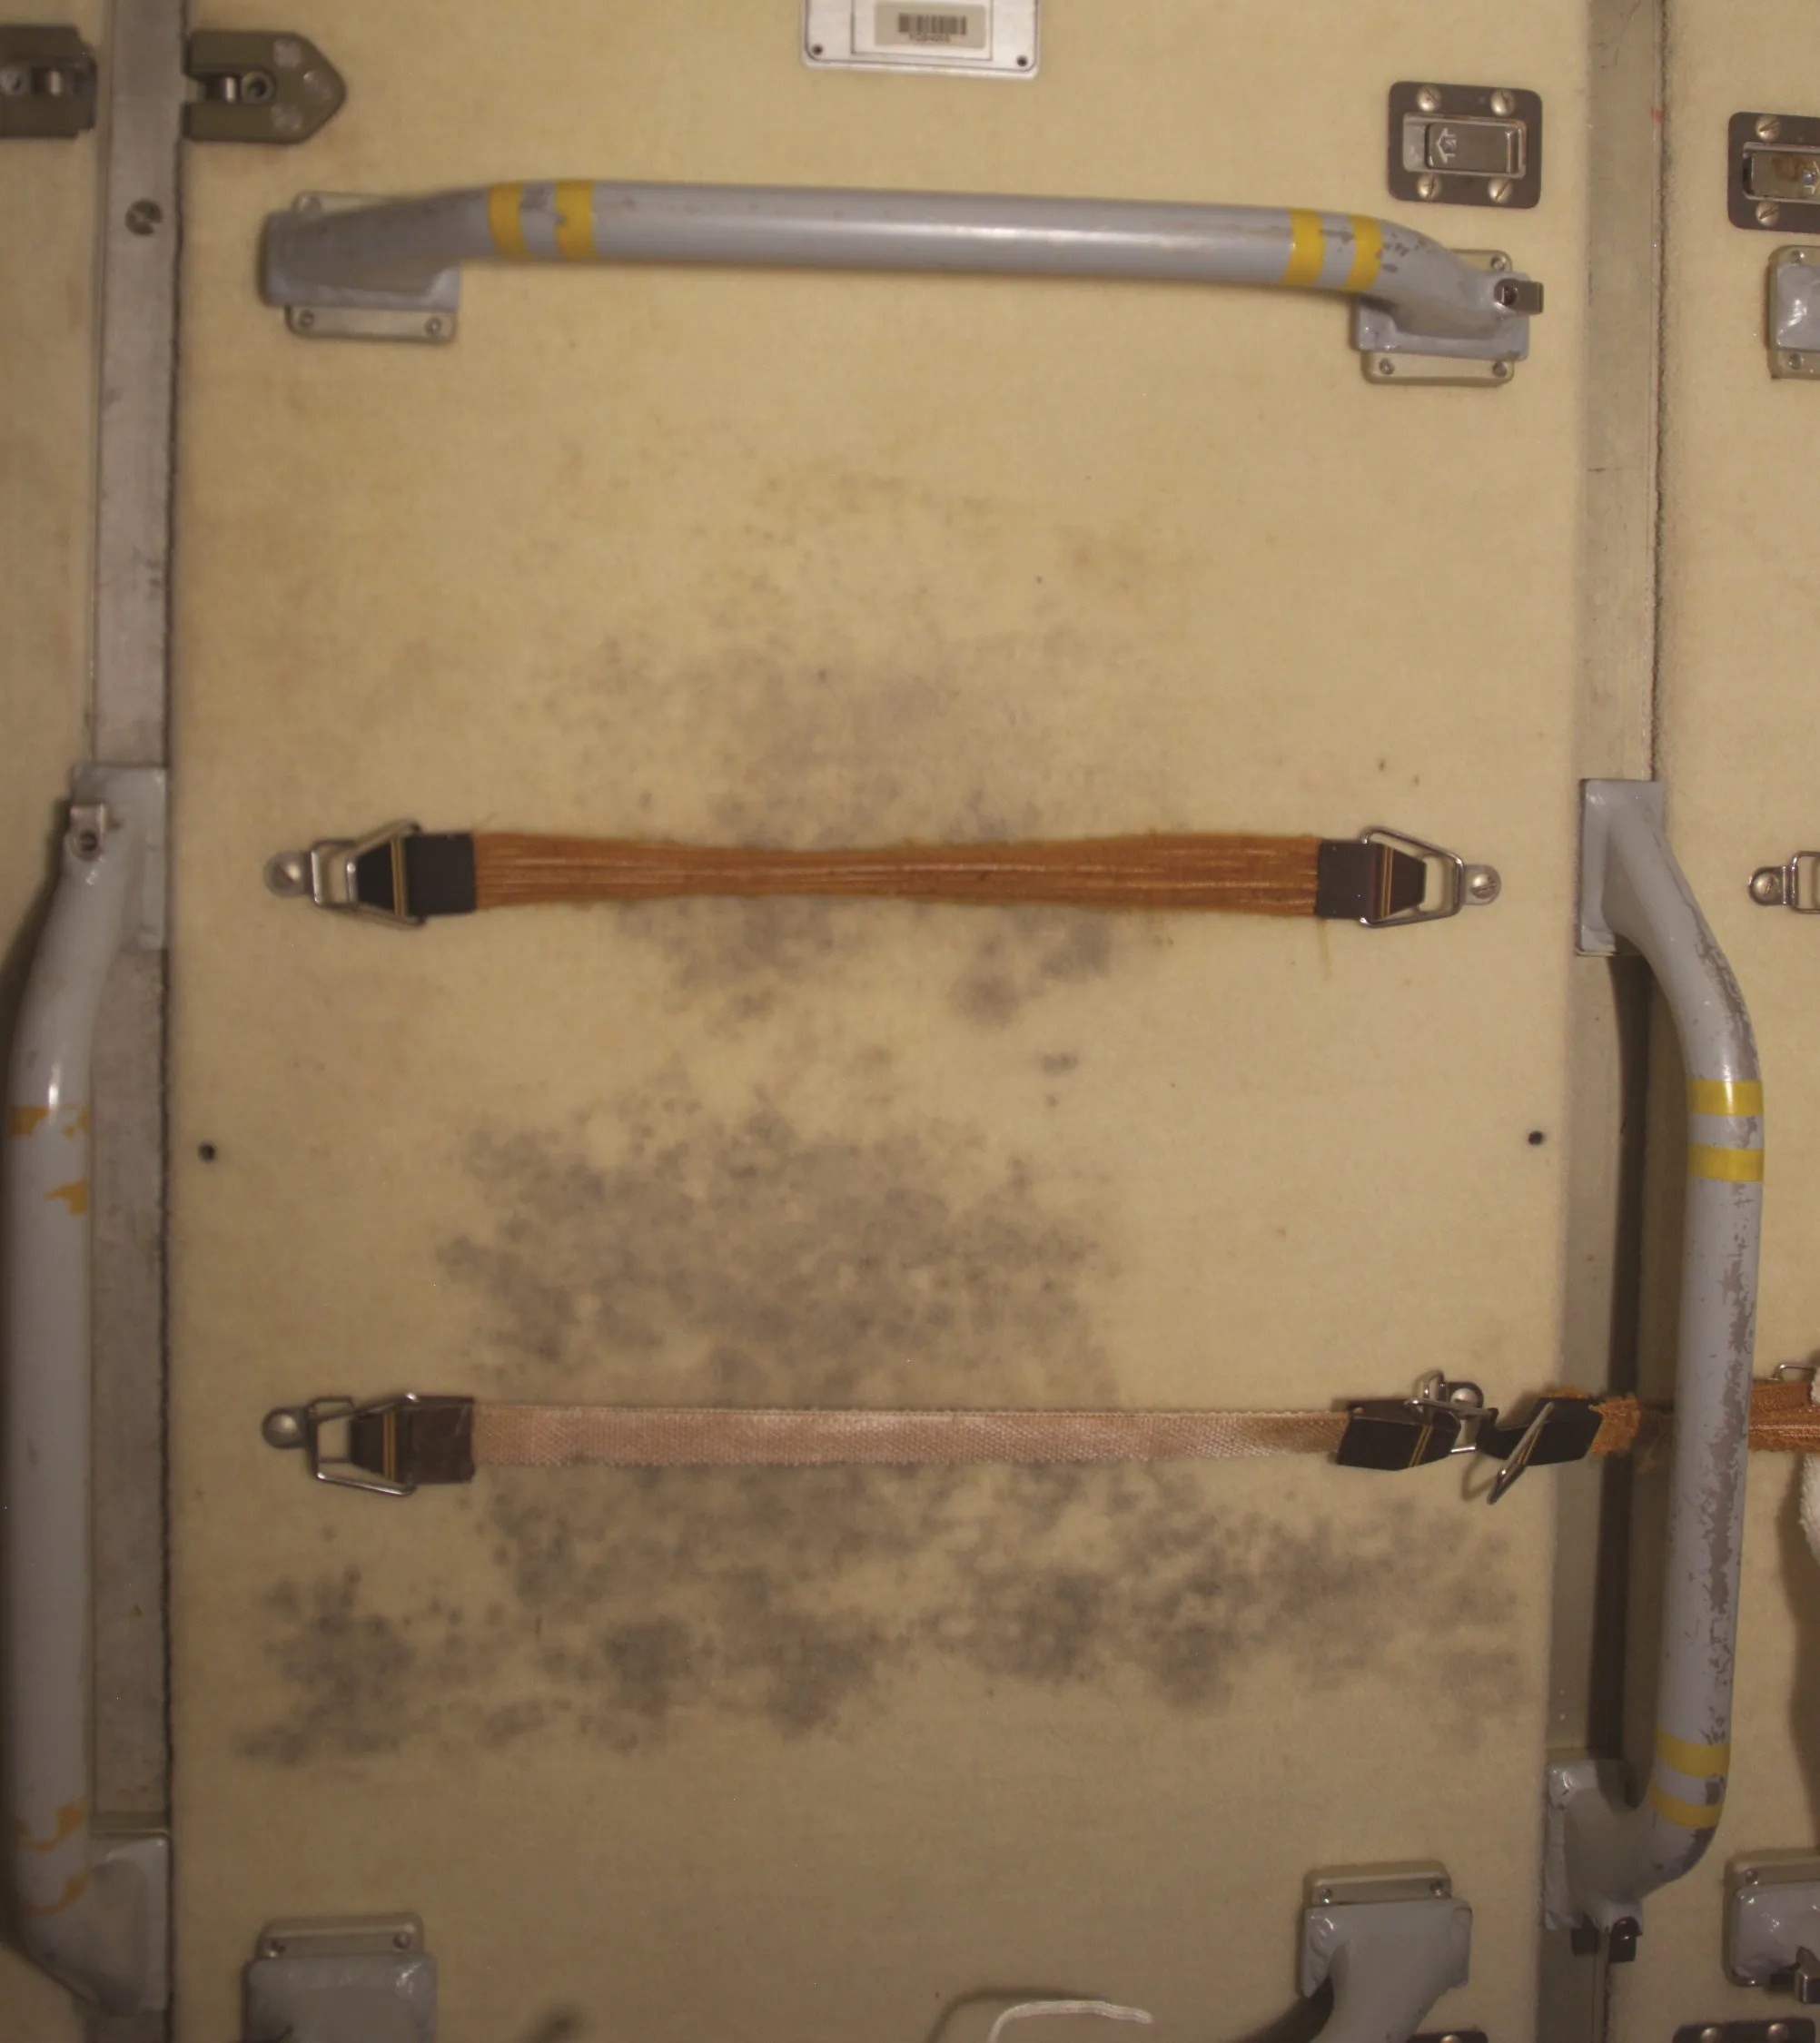 Cream-colored door with handles and straps, with brown spots on surface.